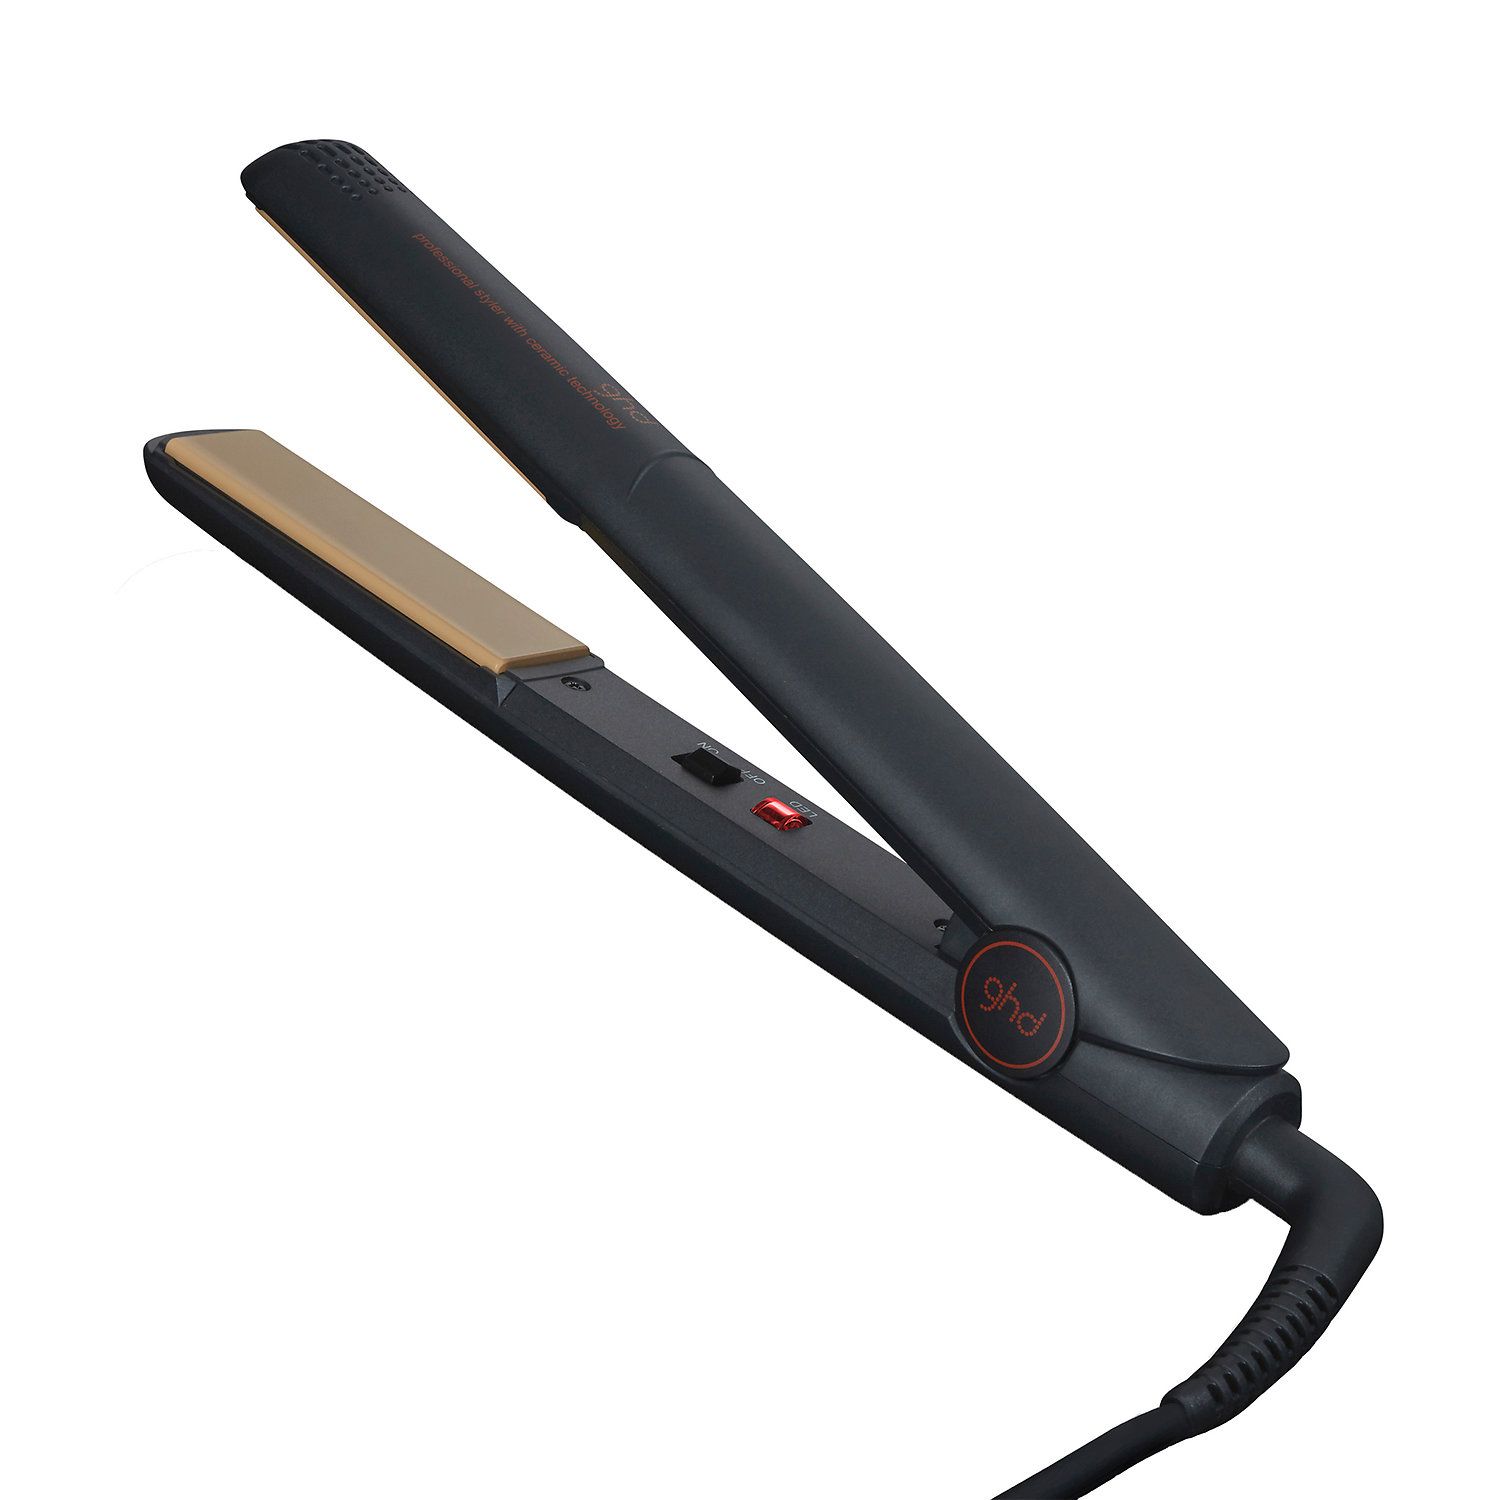 Best Flat Iron for Natural Hair - Hair Straightener Tool for Curly Hair